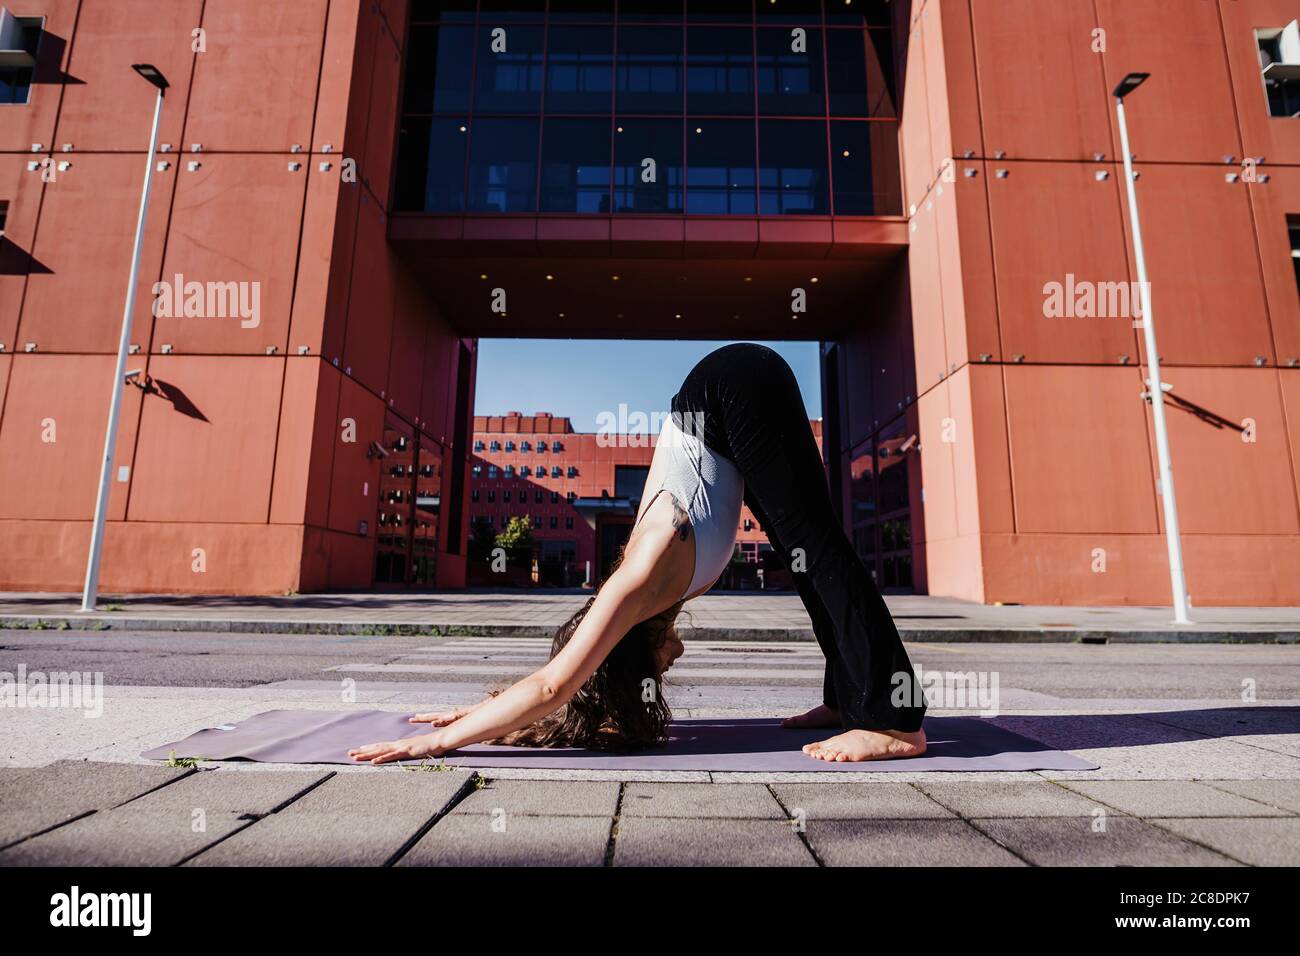 Young woman performing yoga in downward facing dog position on city street Stock Photo